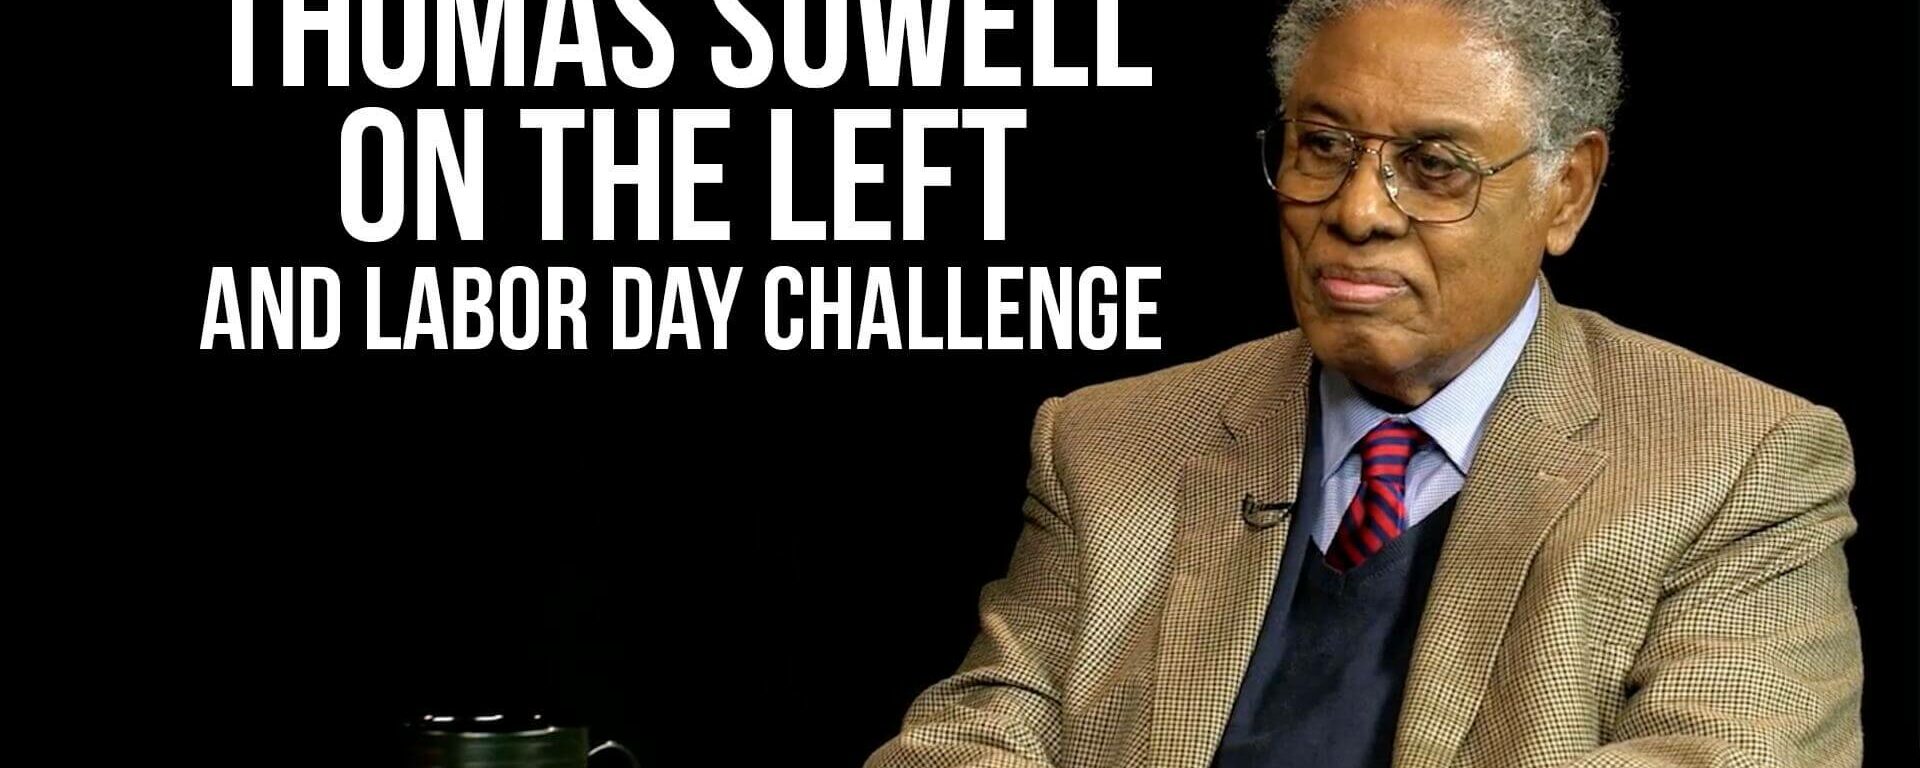 Thomas Sowell on the Left and Labor Day Challenge | SOTG 1085 Pt. 3